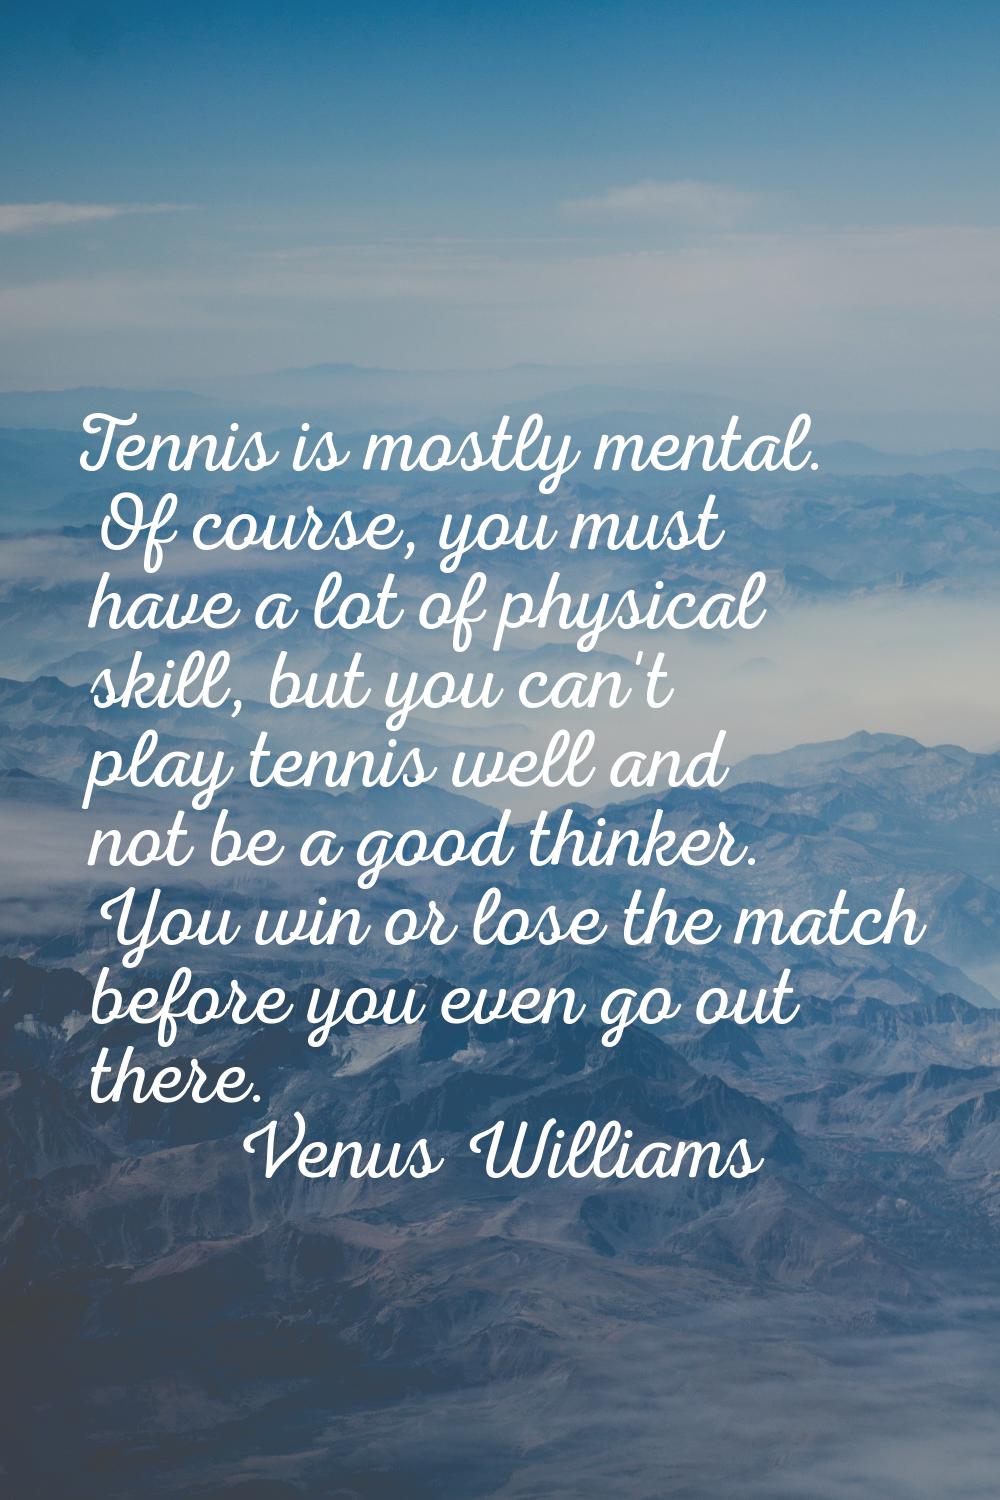 Tennis is mostly mental. Of course, you must have a lot of physical skill, but you can't play tenni